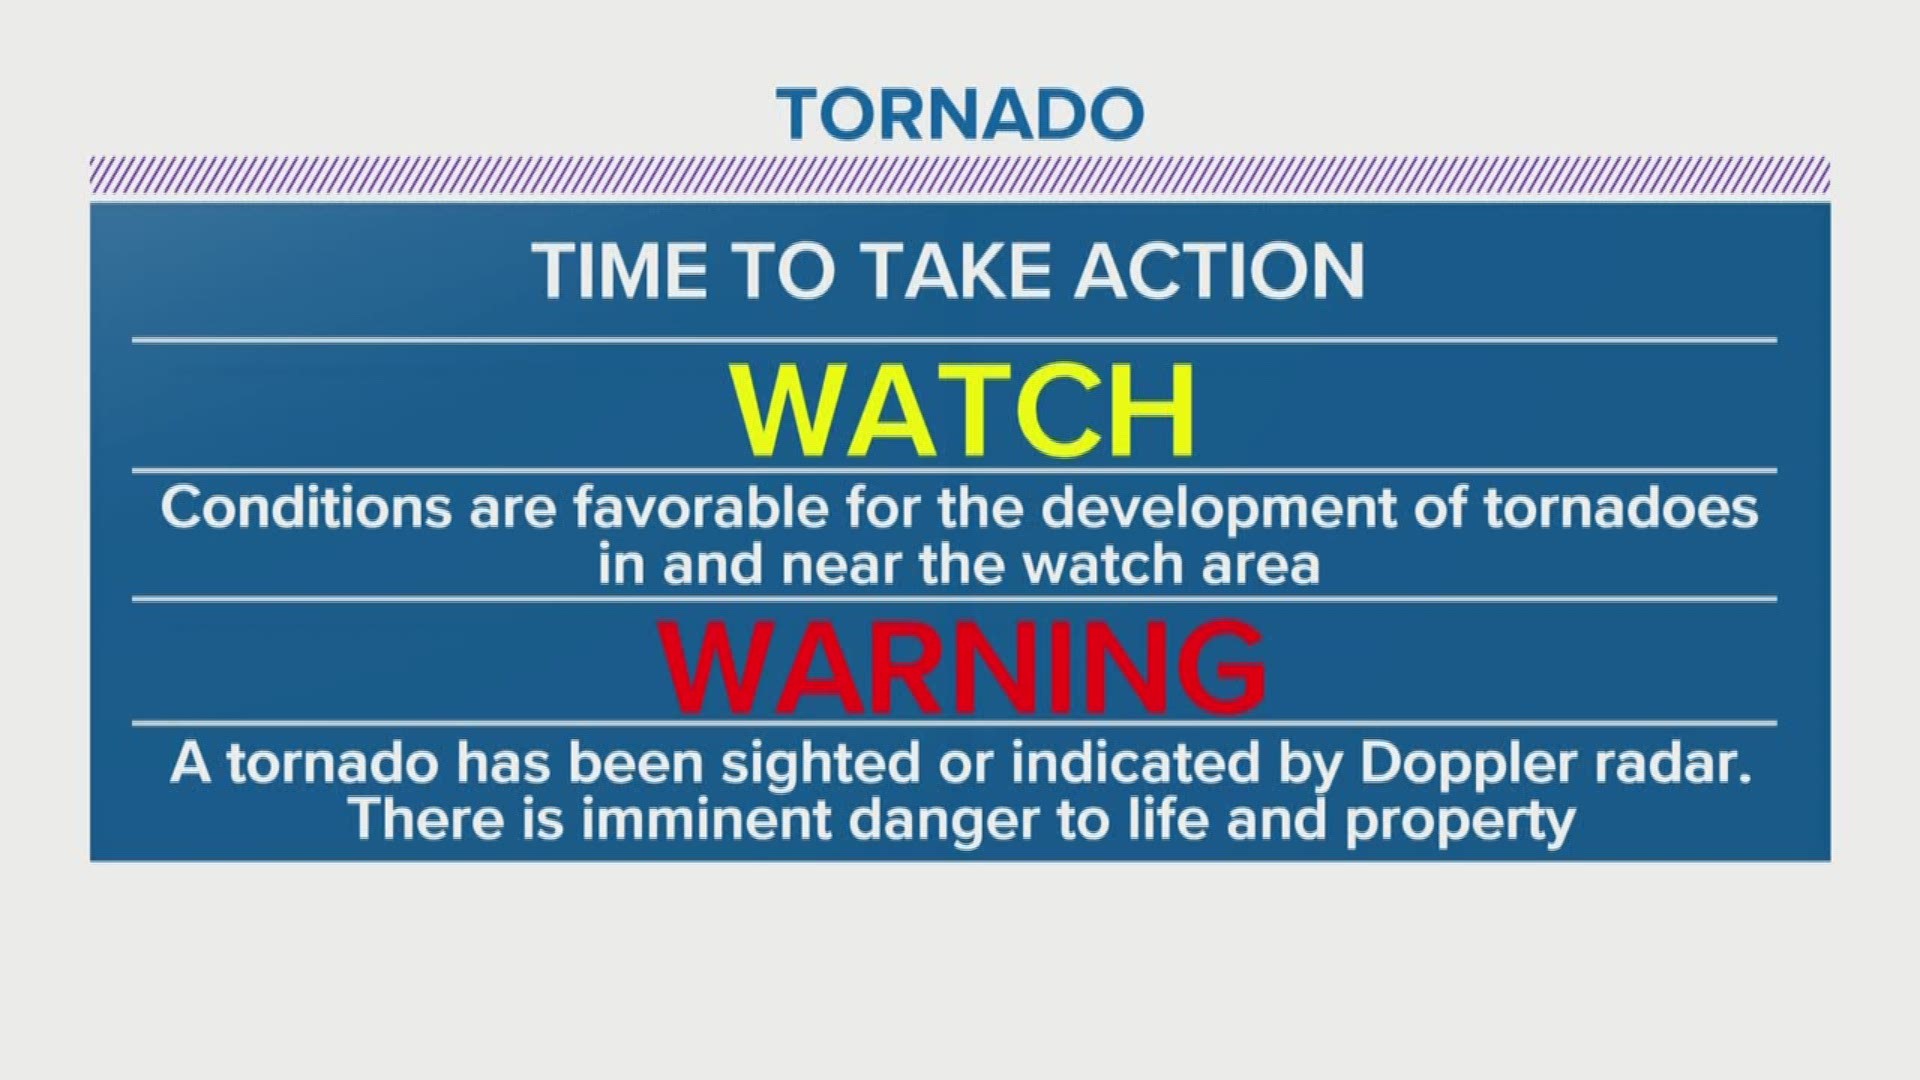 What's the difference between a watch and warning? What about the risk level terms like enhanced or moderate?